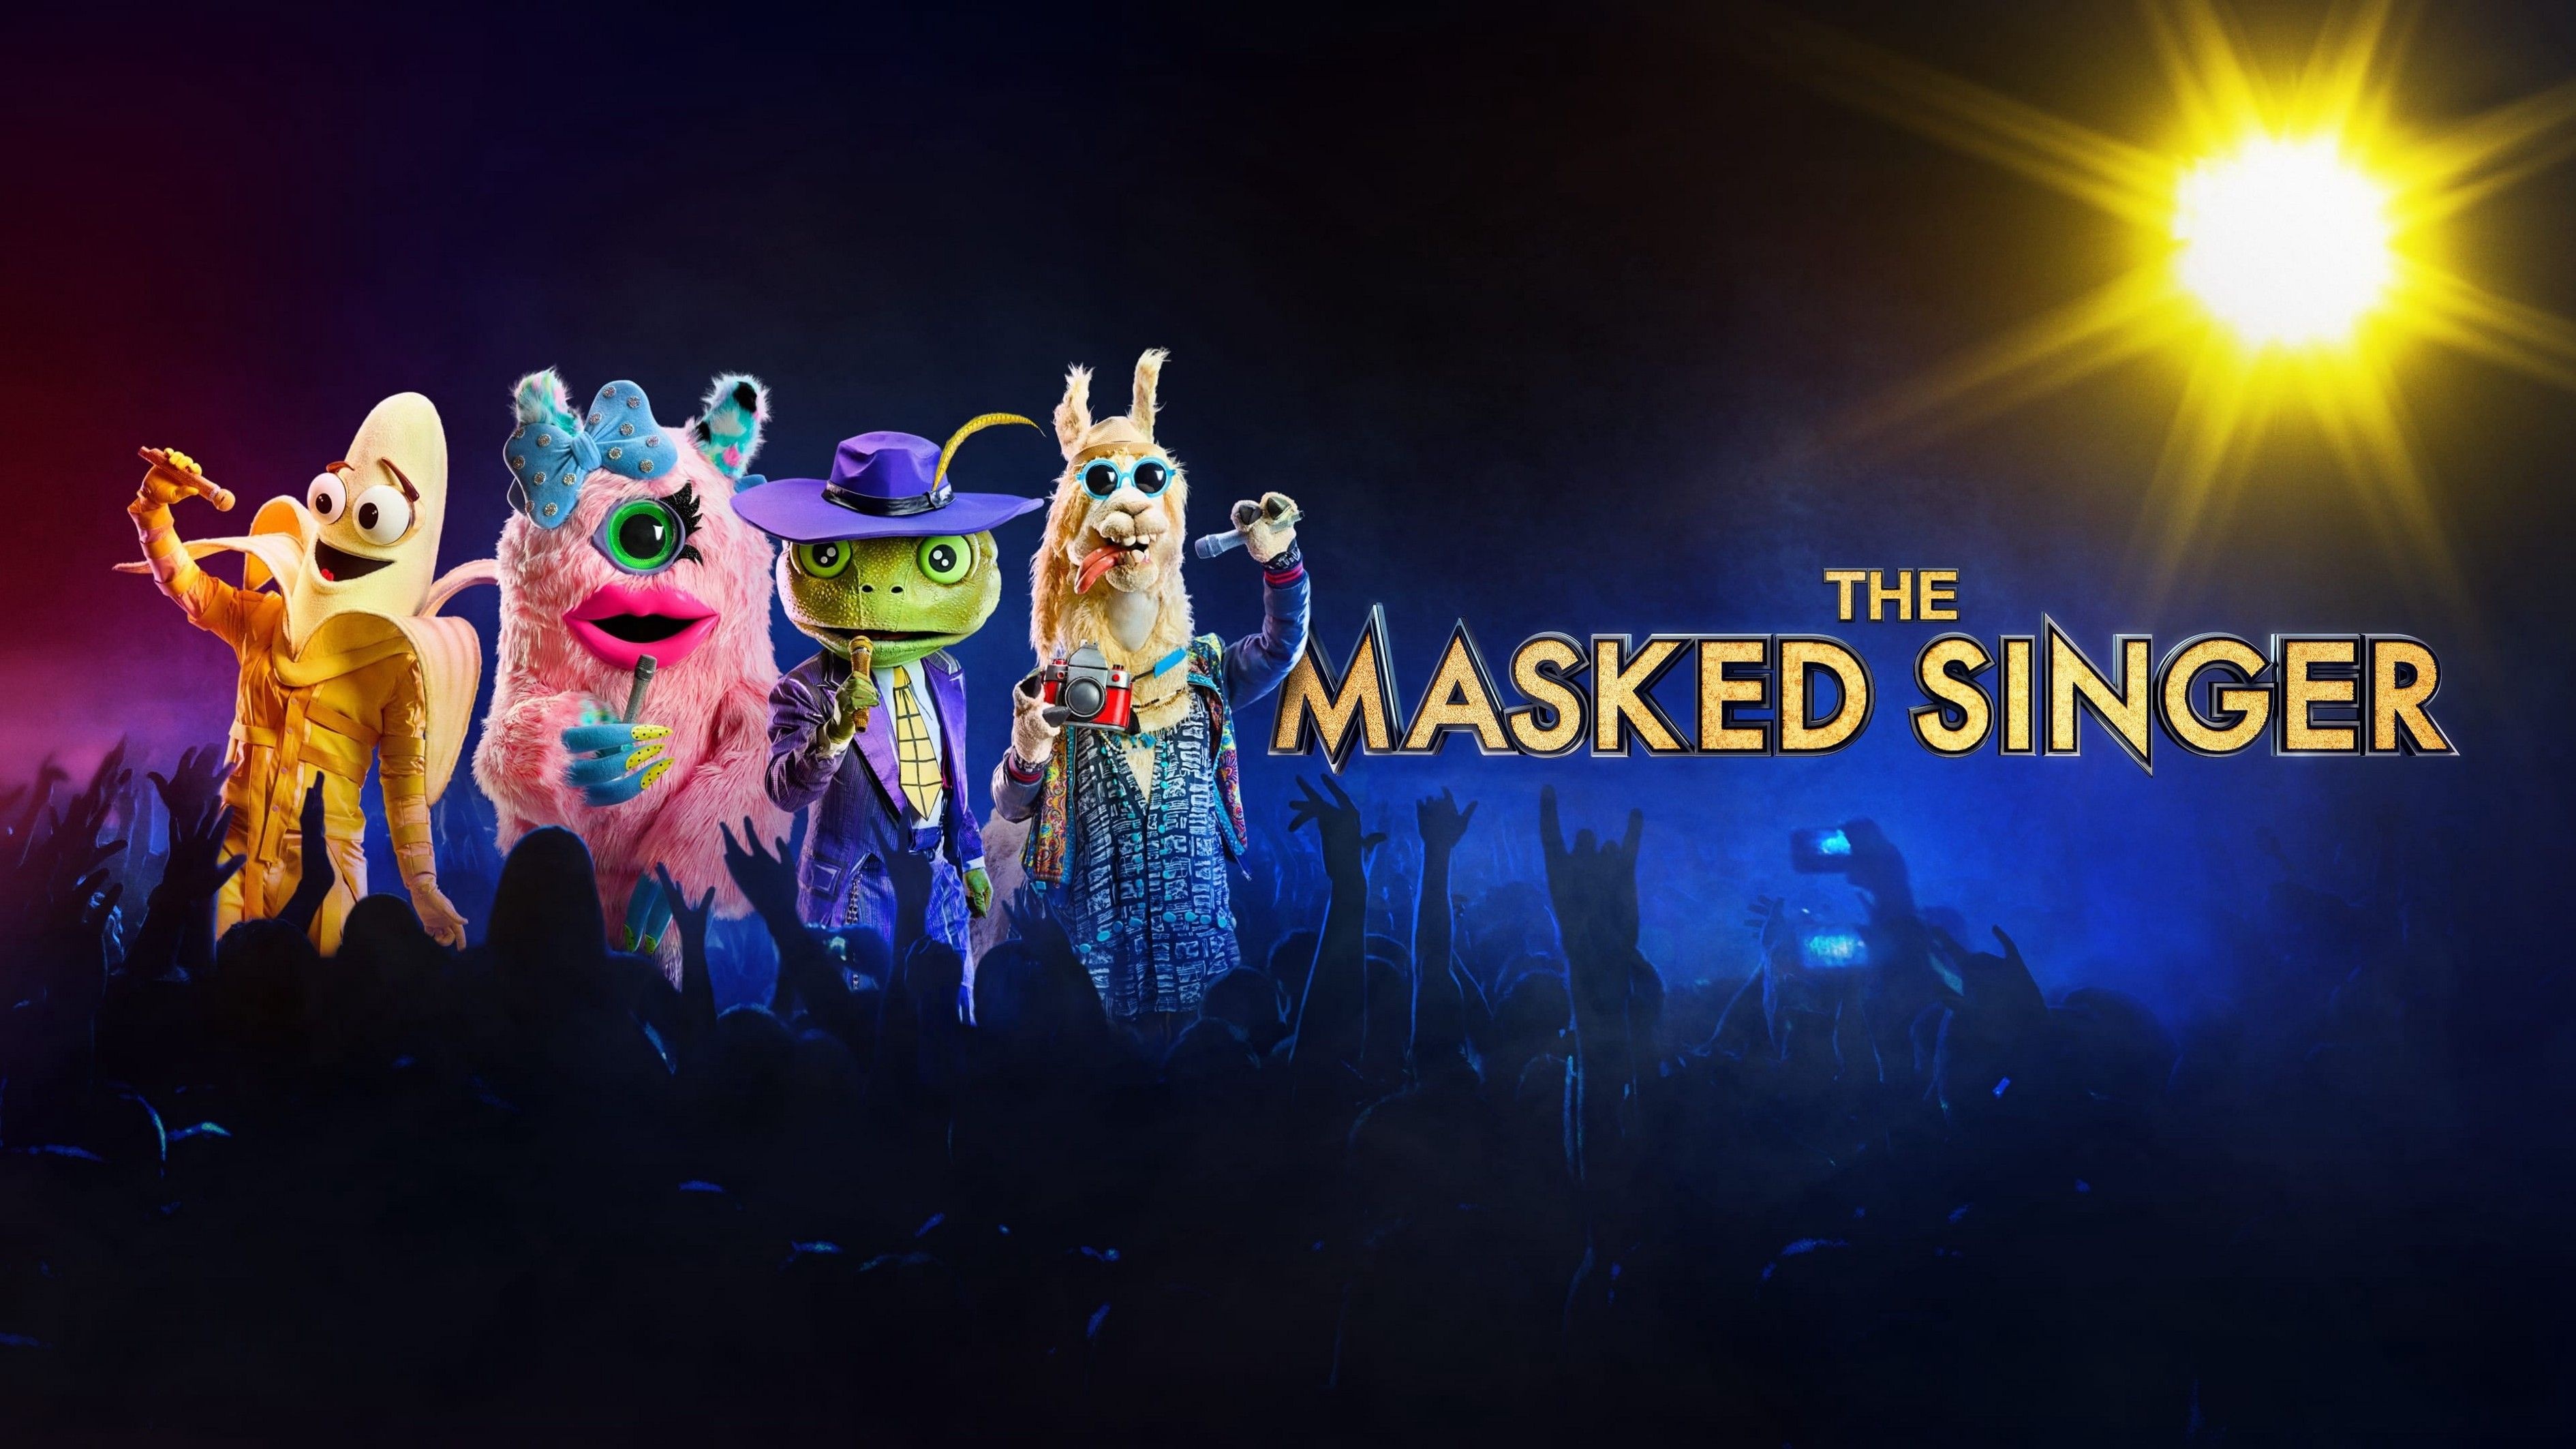 Masked Singer, Top backgrounds, Eye-catching wallpapers, Music-themed images, 3780x2130 HD Desktop